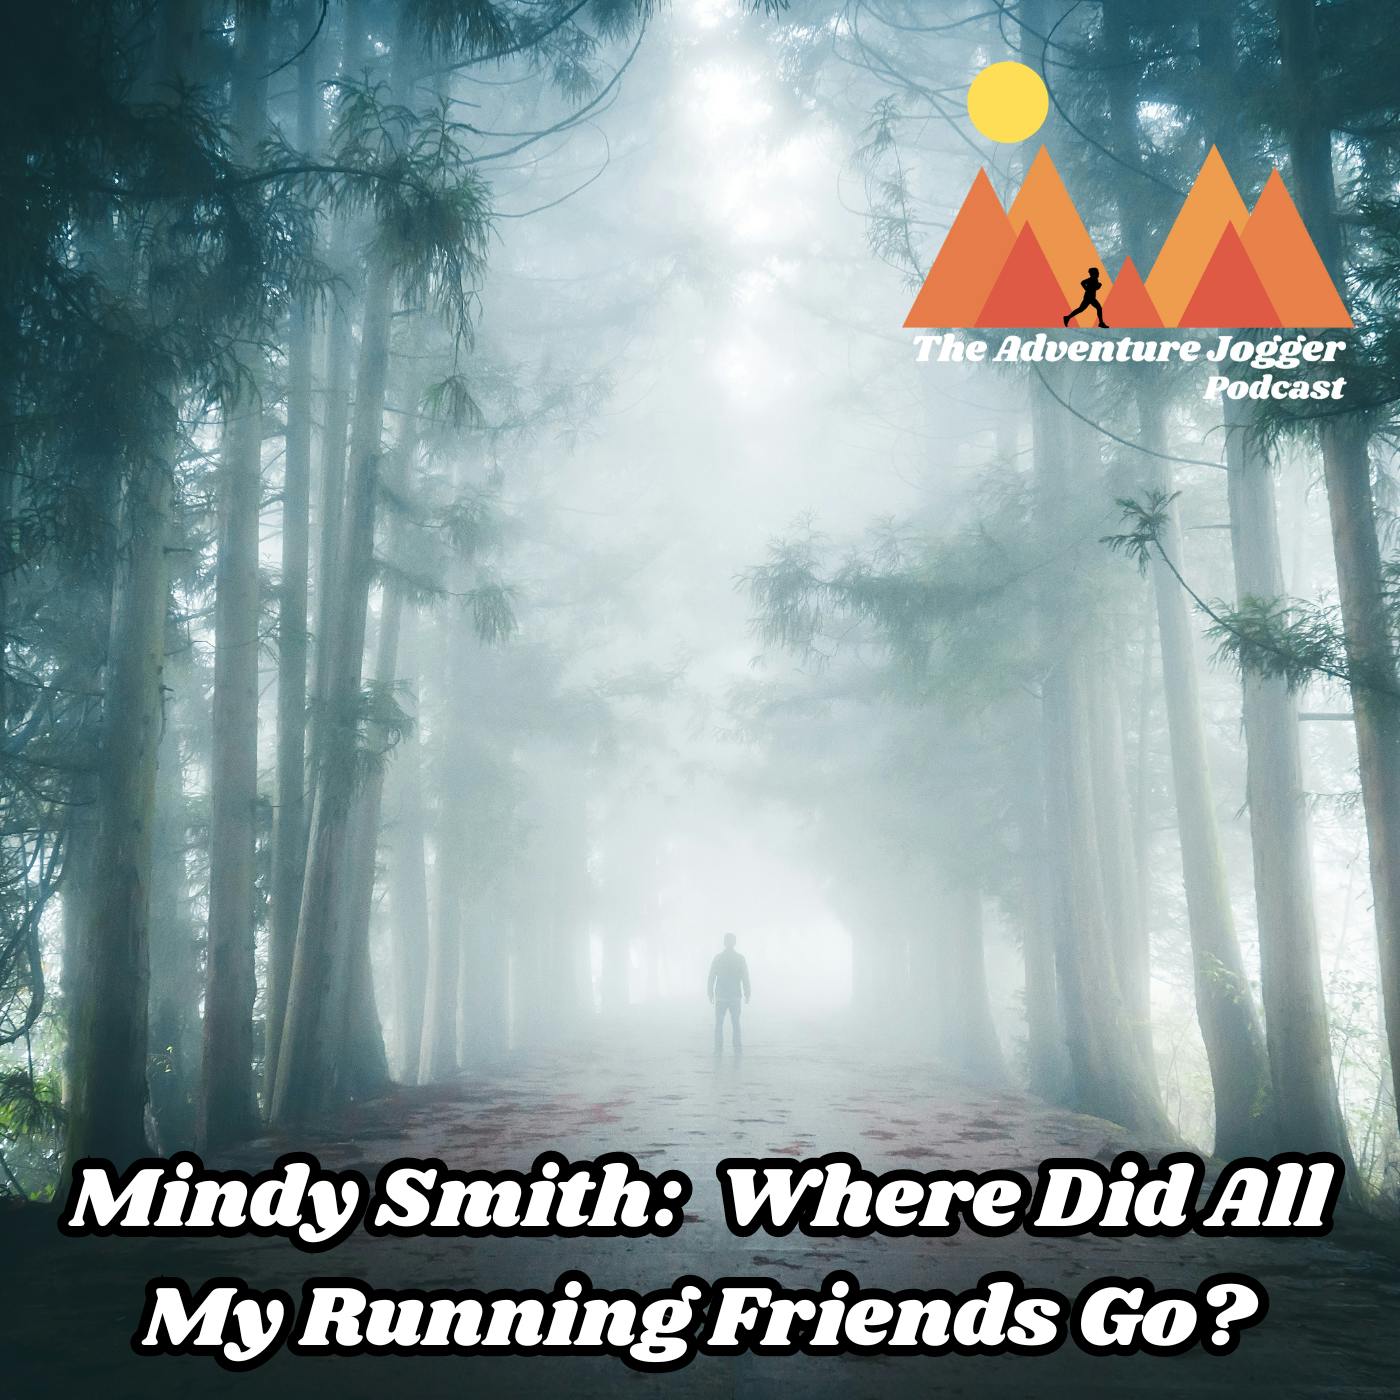 Mindy Smith:  Where Did All My Running Friends Go?